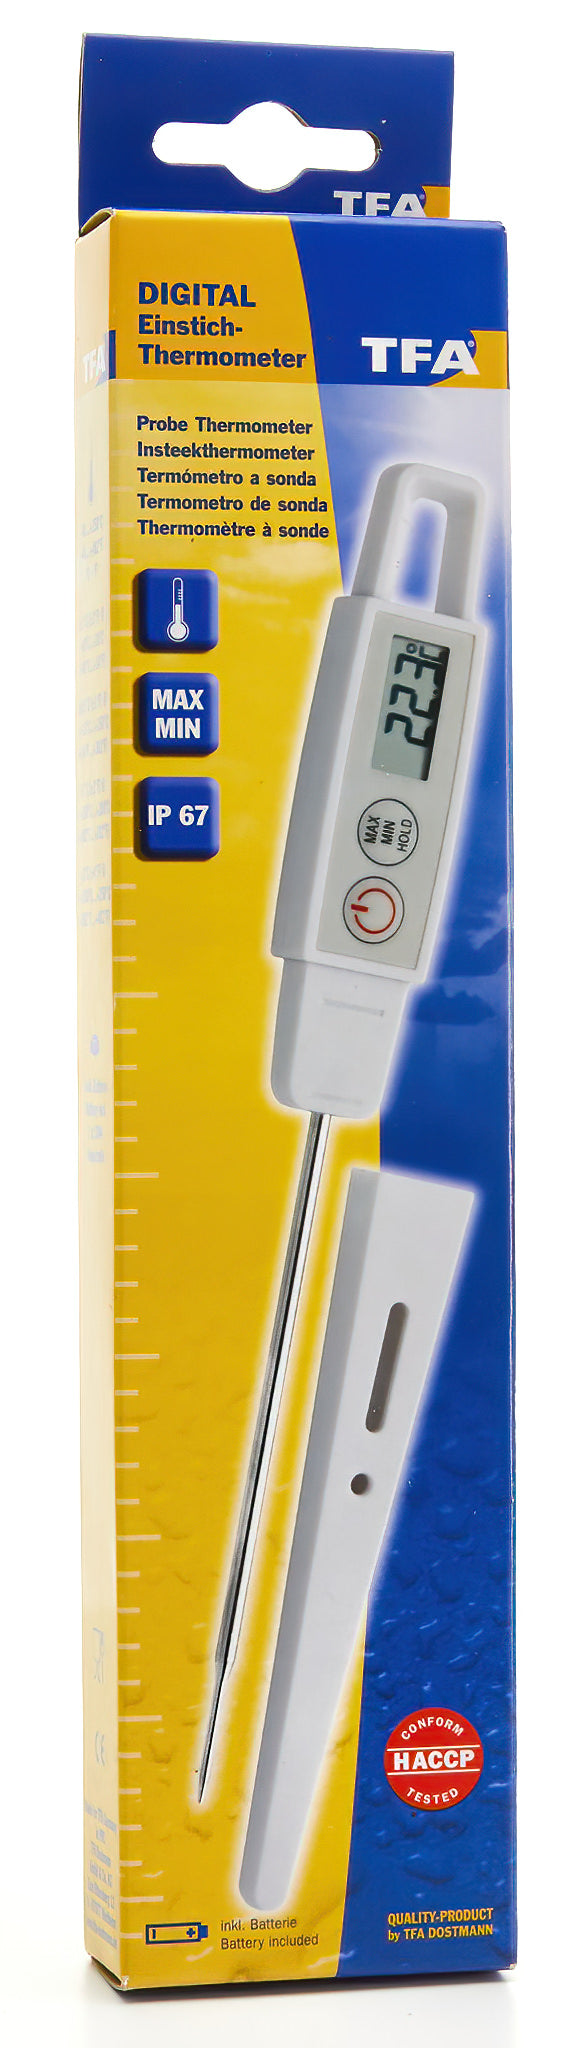 Digital LCD Probe thermometer